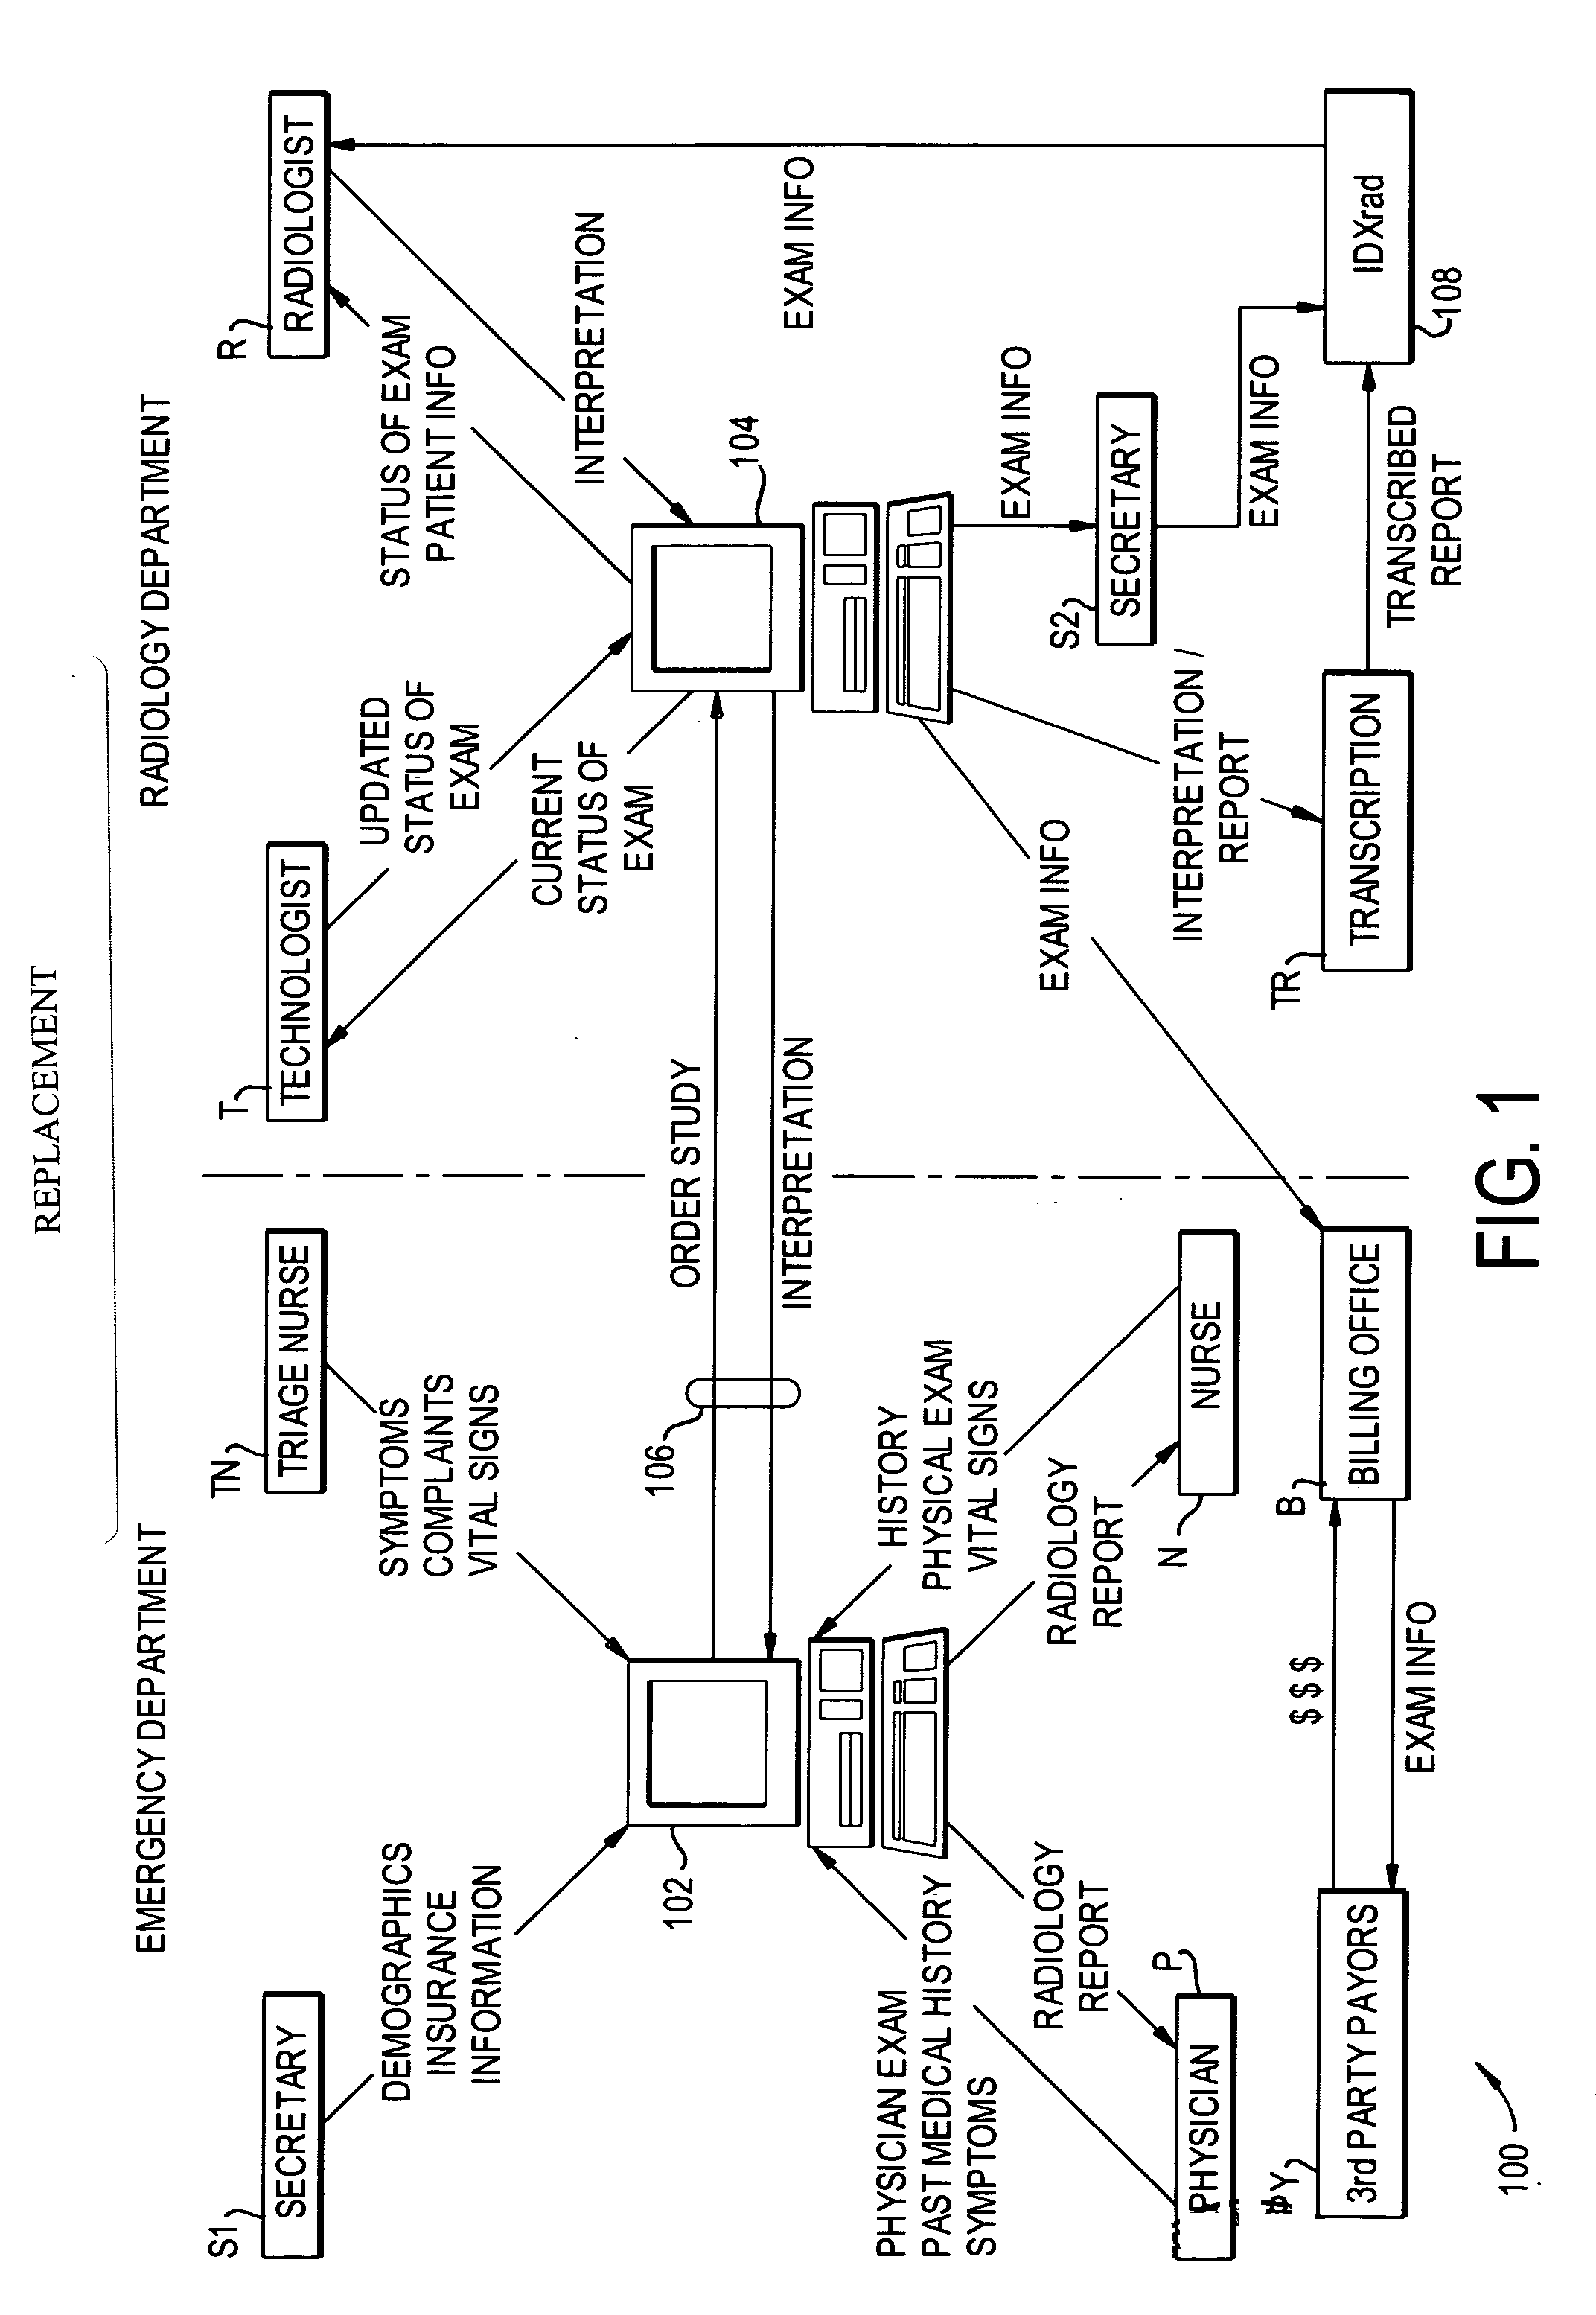 Radiology order entry and reporting system